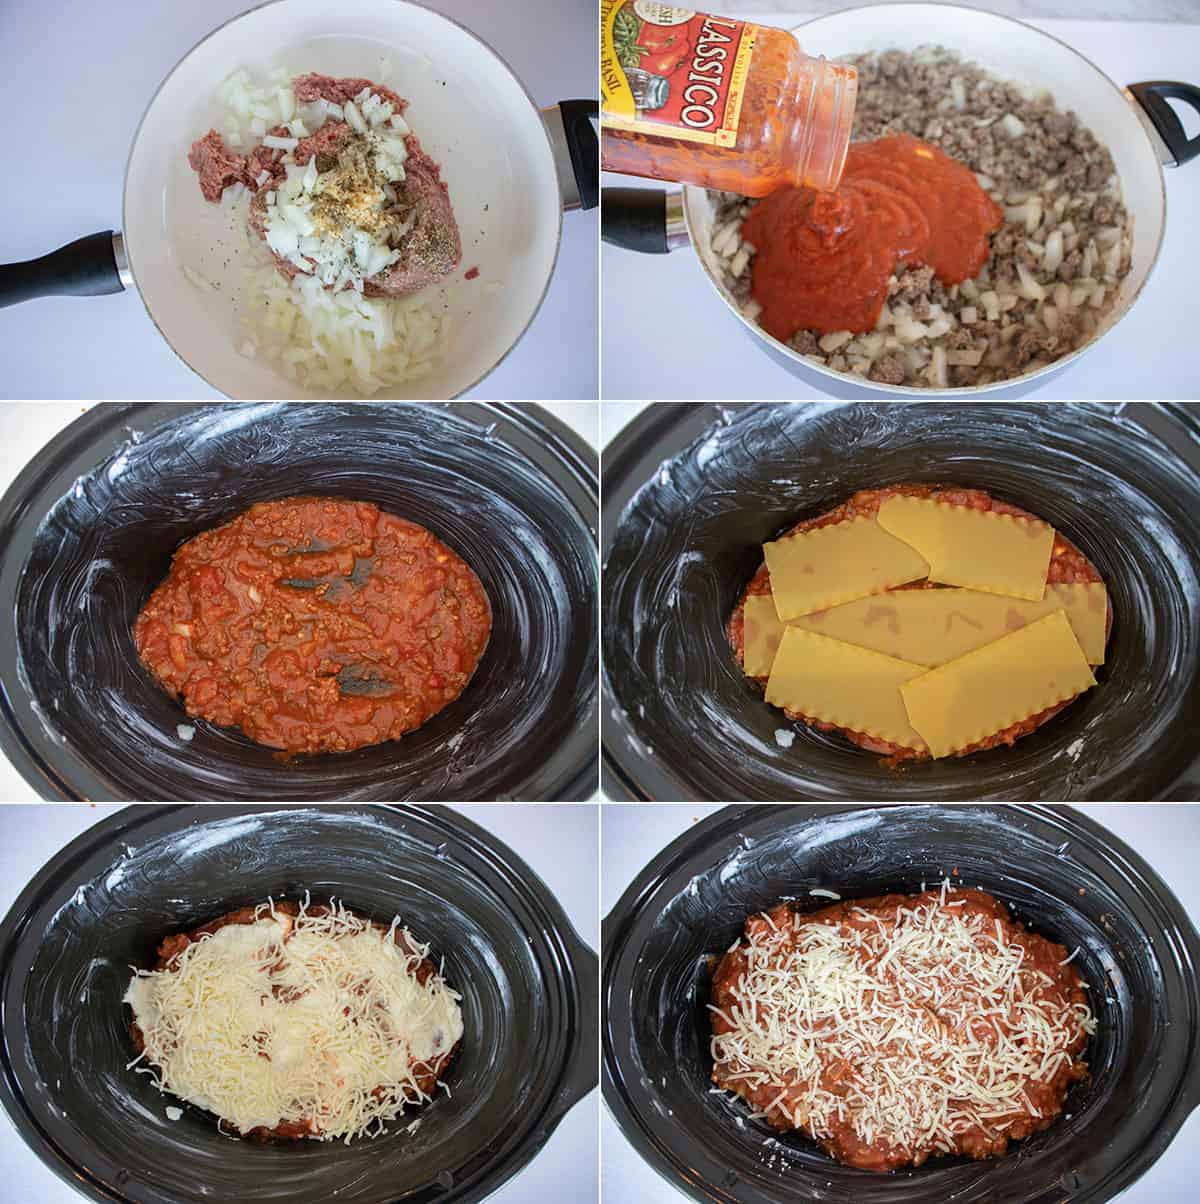 How to make Lasagna in a crockpot.